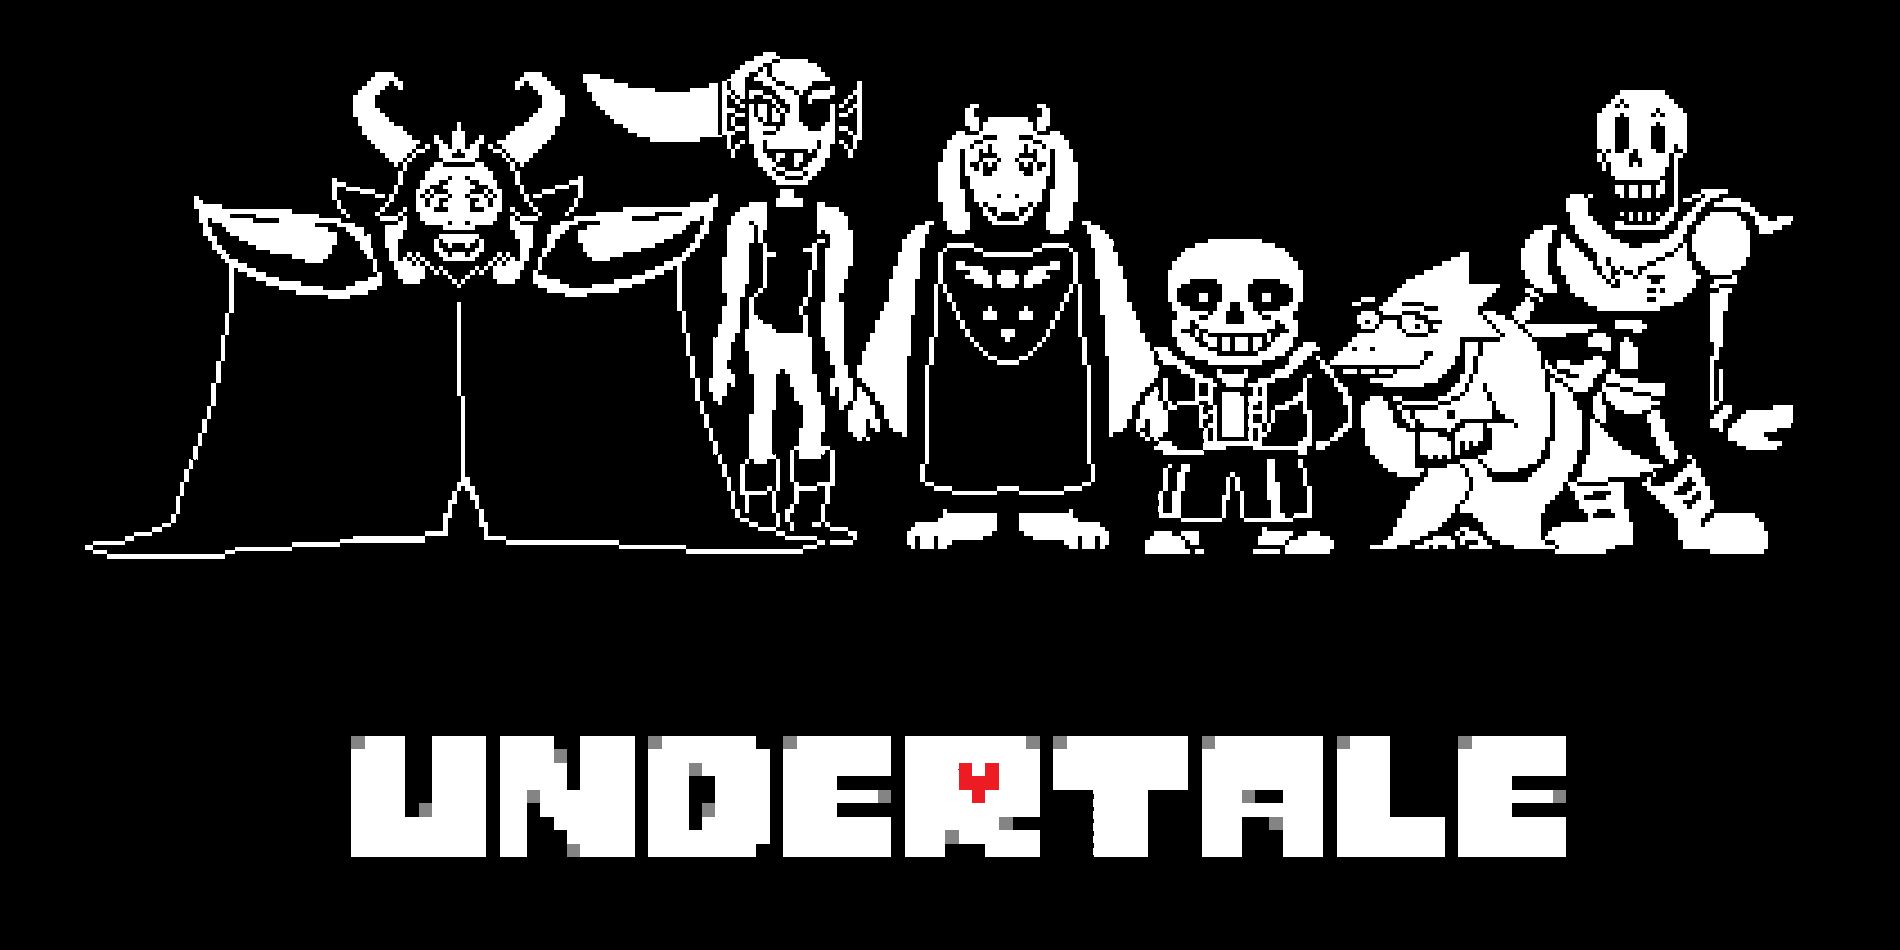 The monster cast of Undertale including two goats, a fish, a lizard, and two skeletons, stands above the logo.